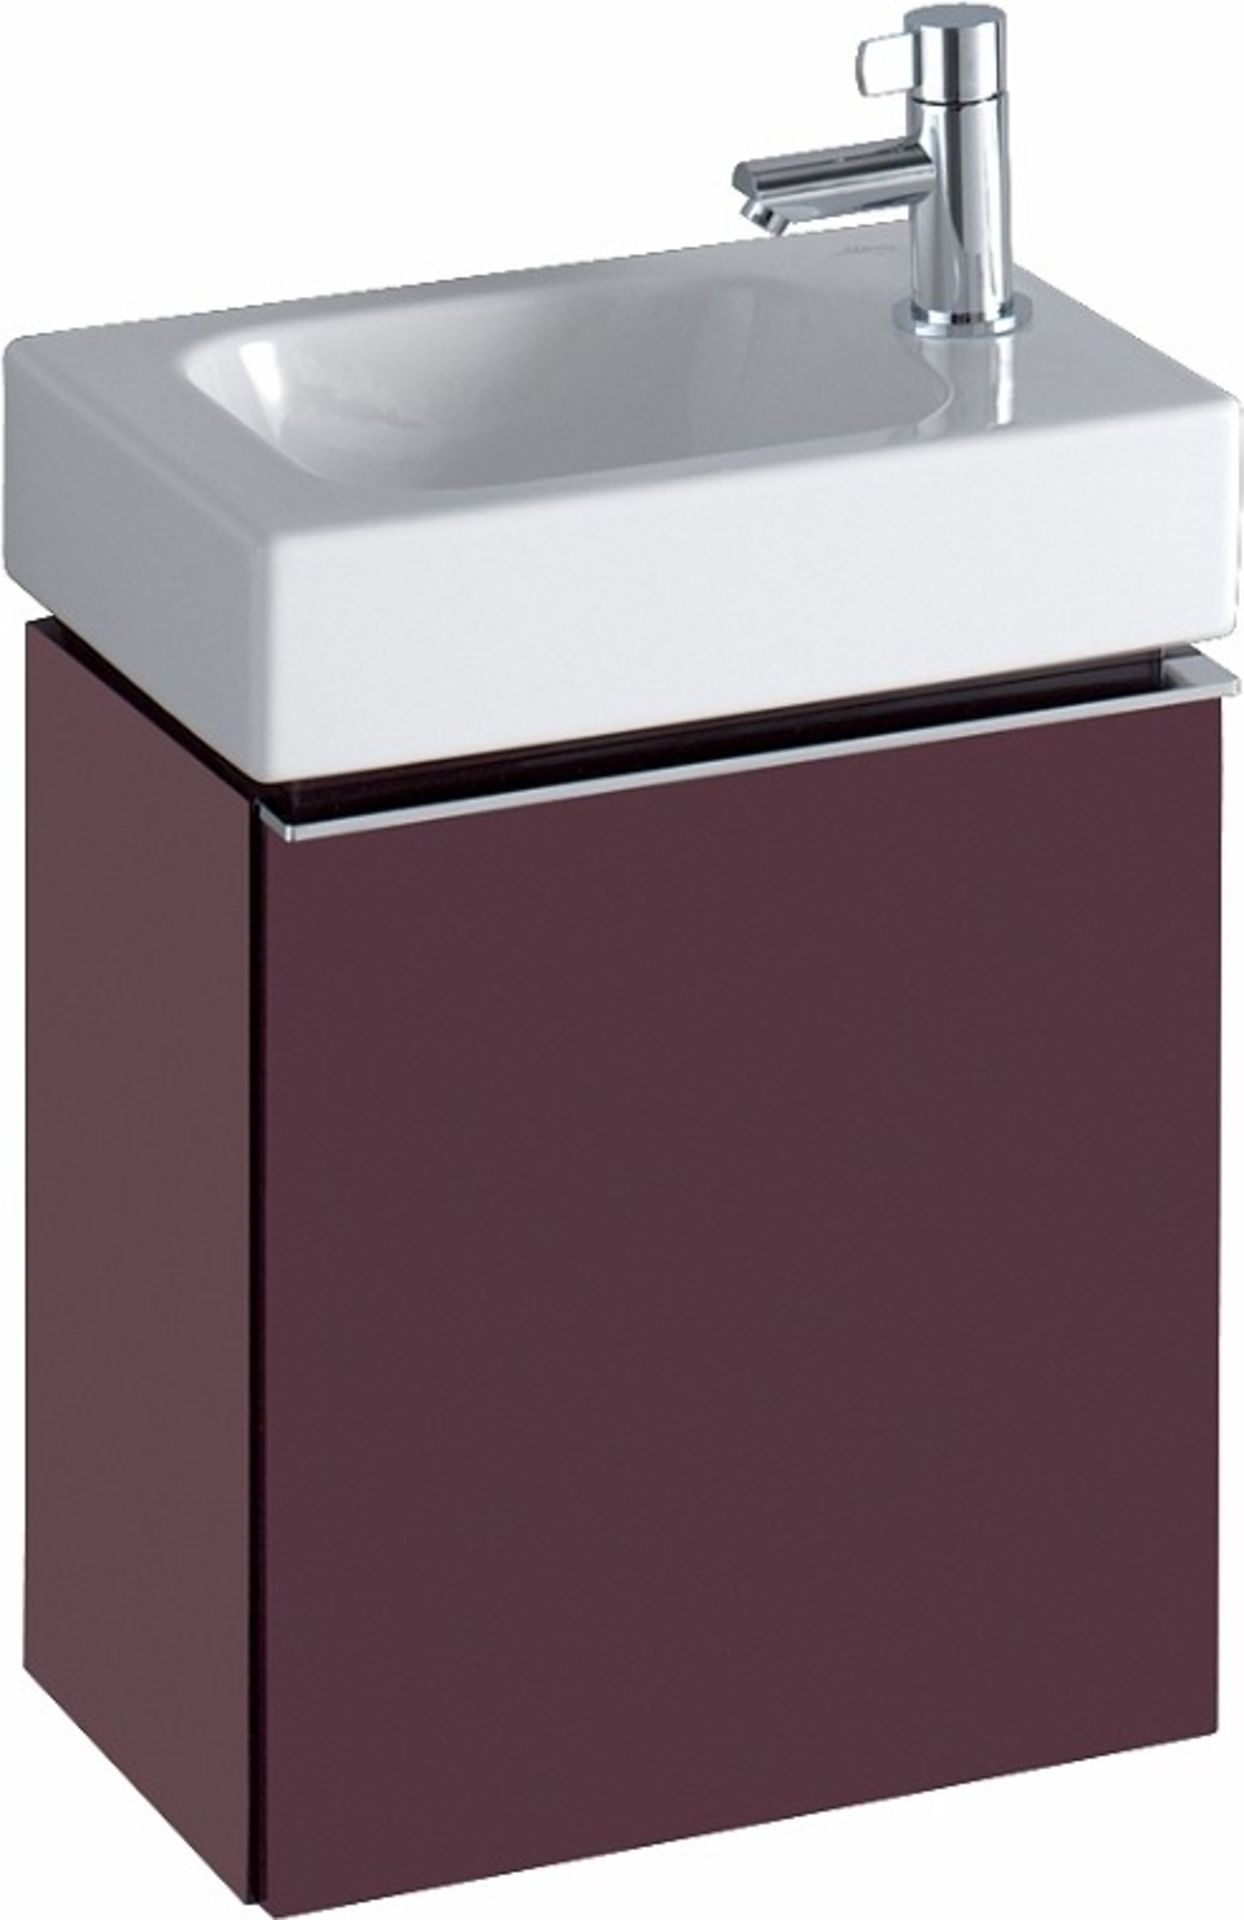 NEW (F104) Keramag iCon 370mm Cloakroom Burgendy Vanity unit. RRP £399.99. COMES COMPLETE WITH... - Image 2 of 2